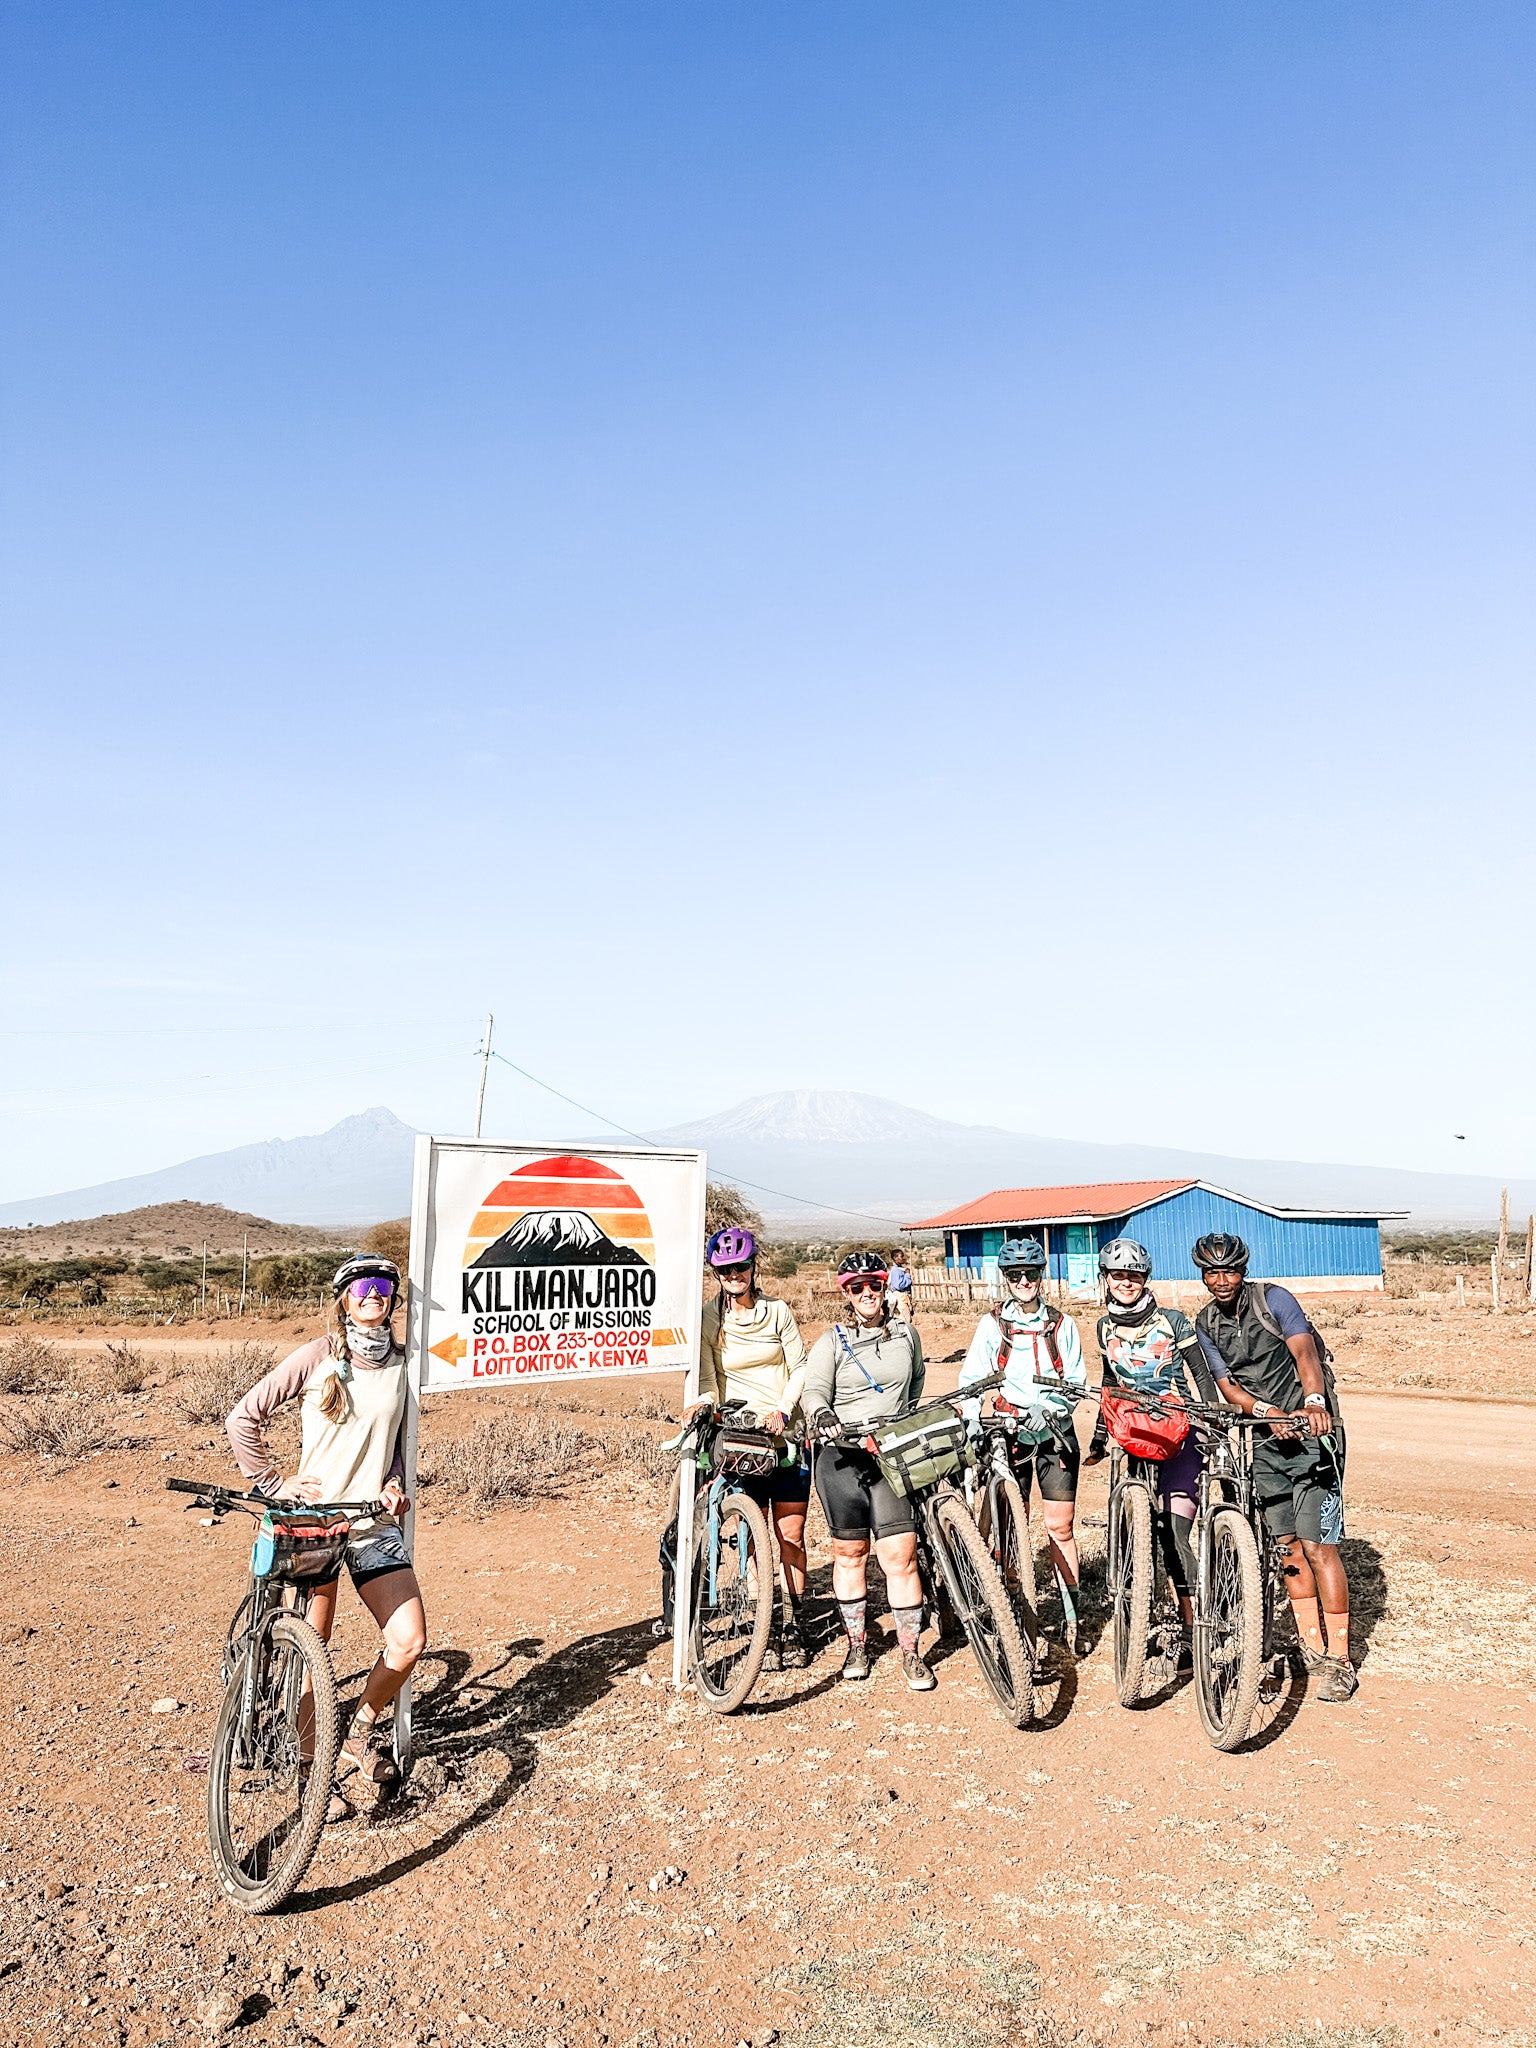 Riding the Rhythms of Kenya: A Guide to Slow Travel